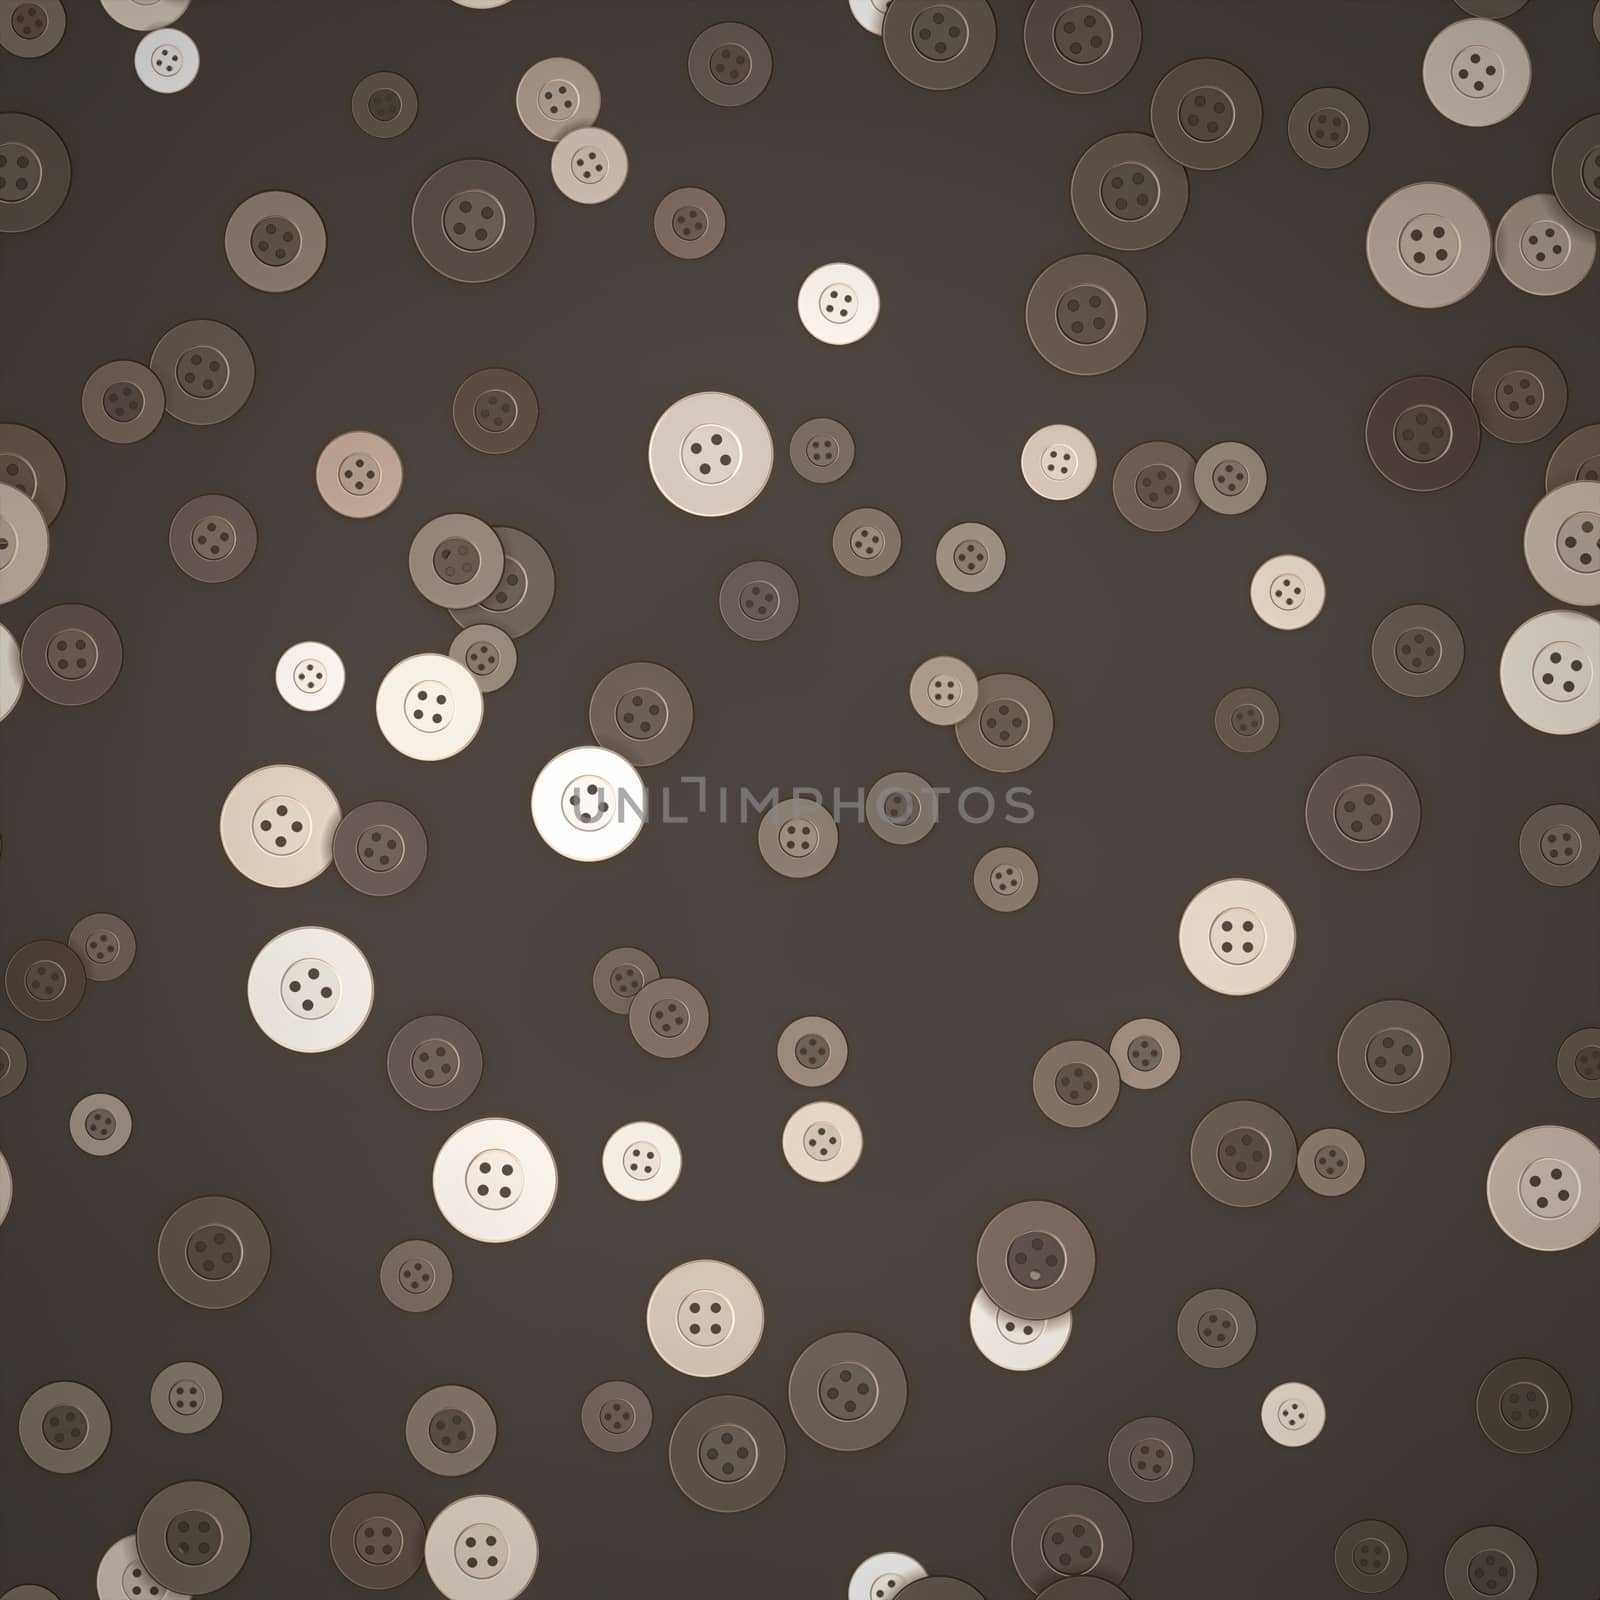 An illustration of some buttons texture background